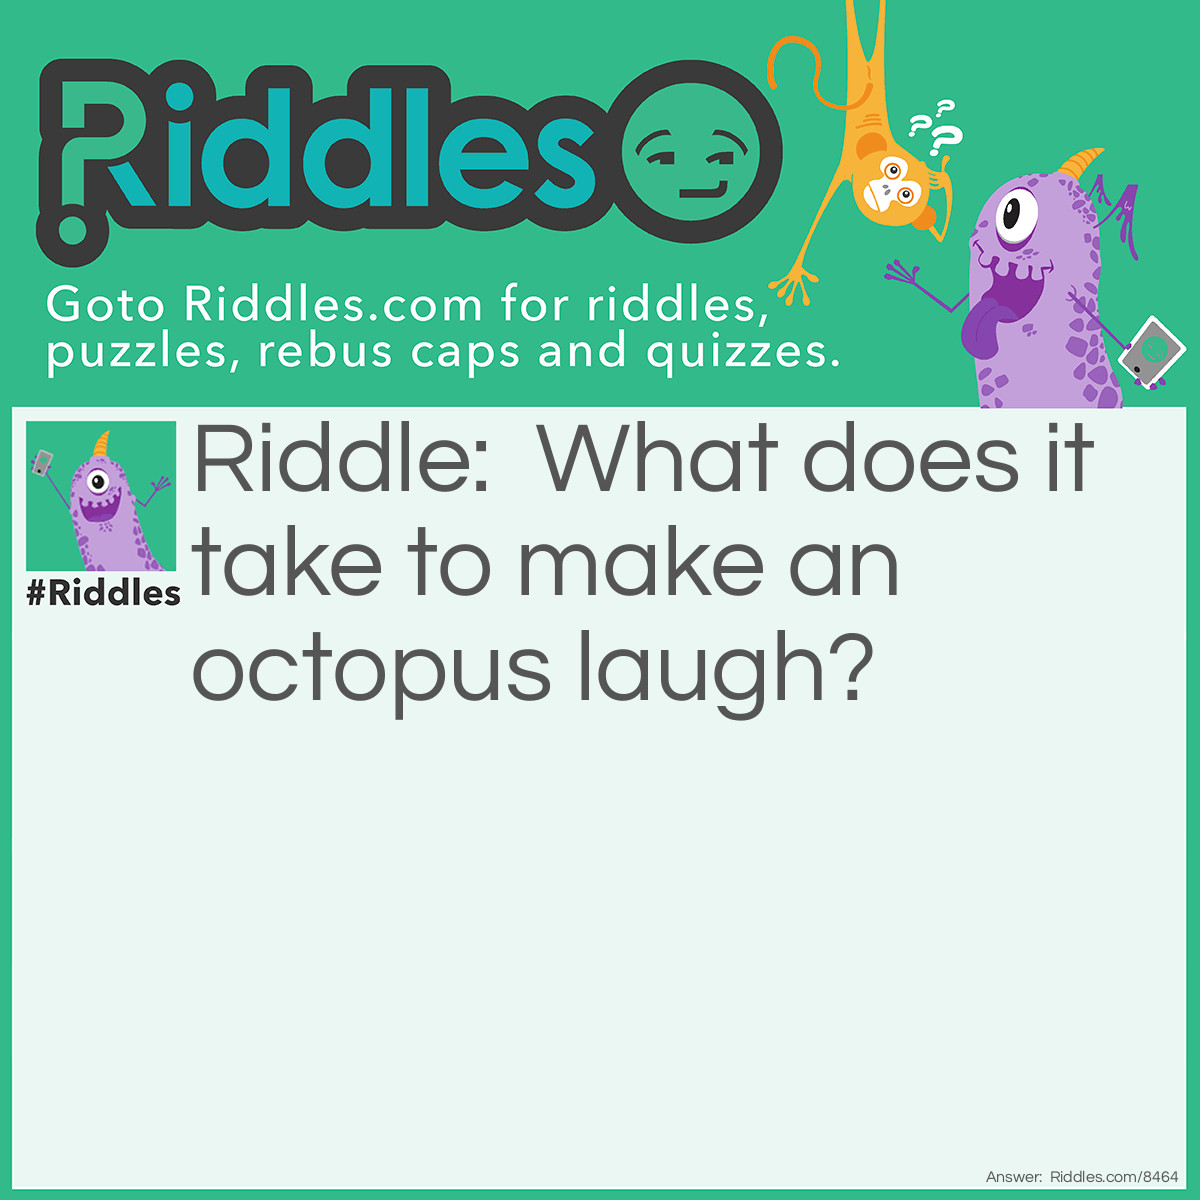 Riddle: What does it take to make an octopus <a title="laugh" href="https://www.riddles.com/funny-riddles">laugh</a>? Answer: Ten tickles.